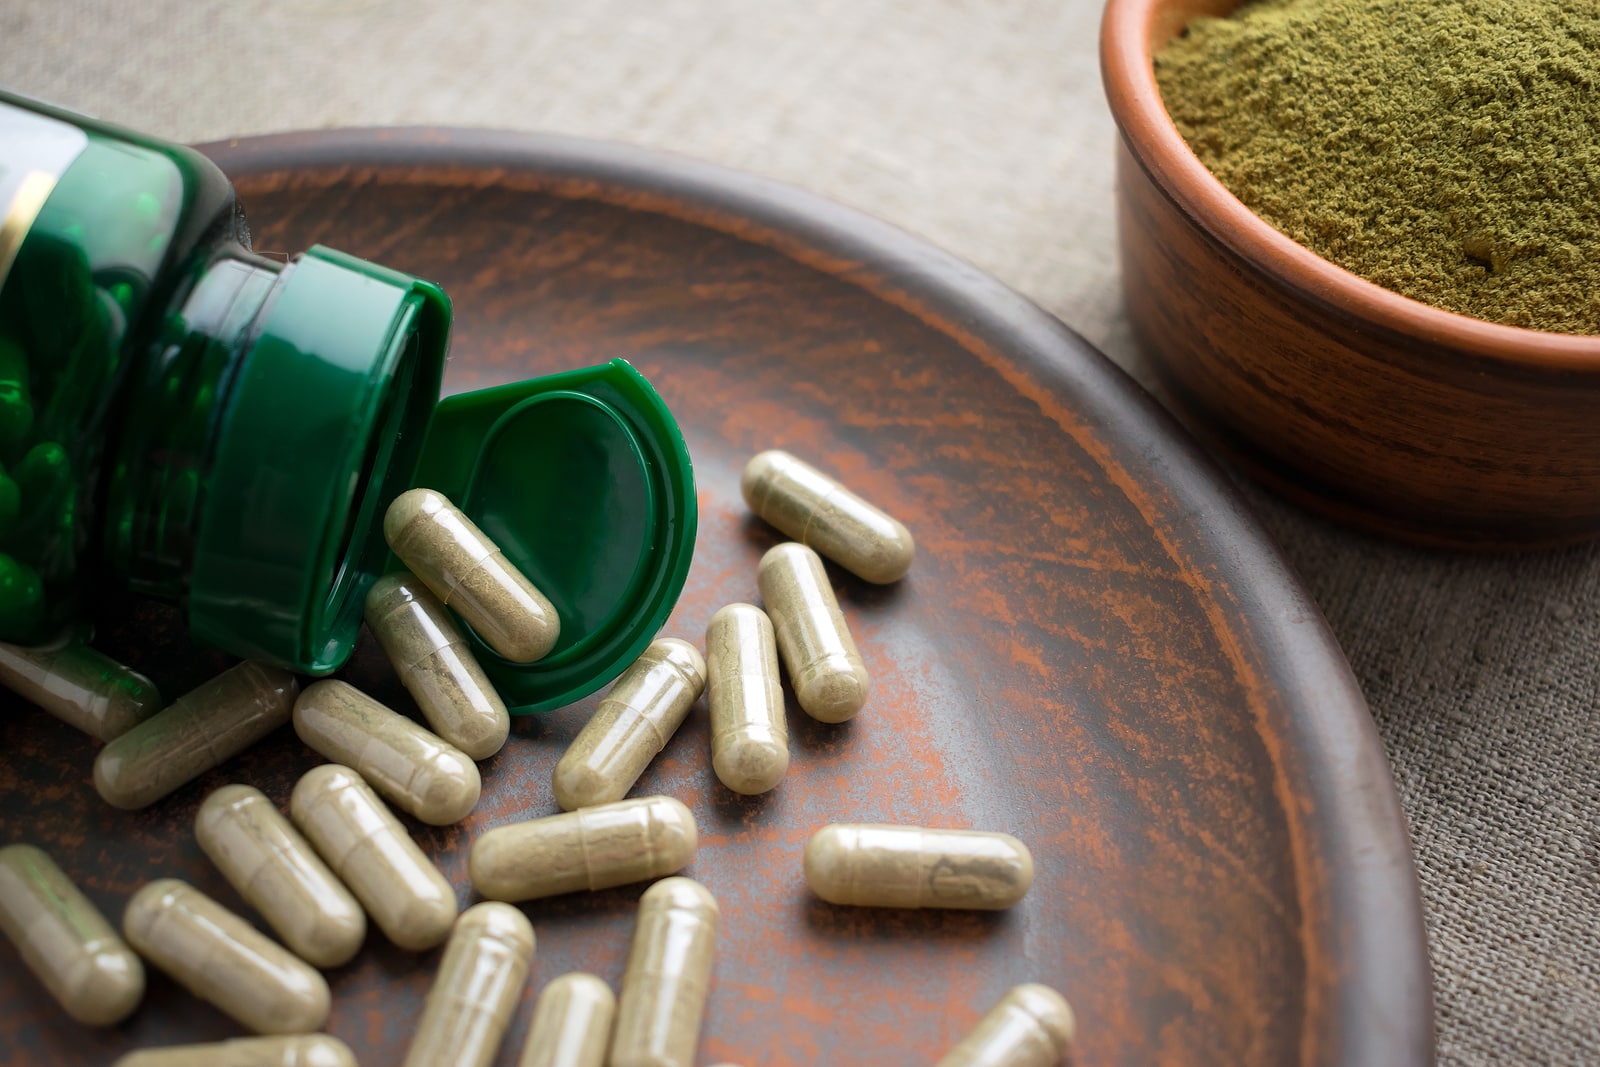 Supplements to Boost Immune System